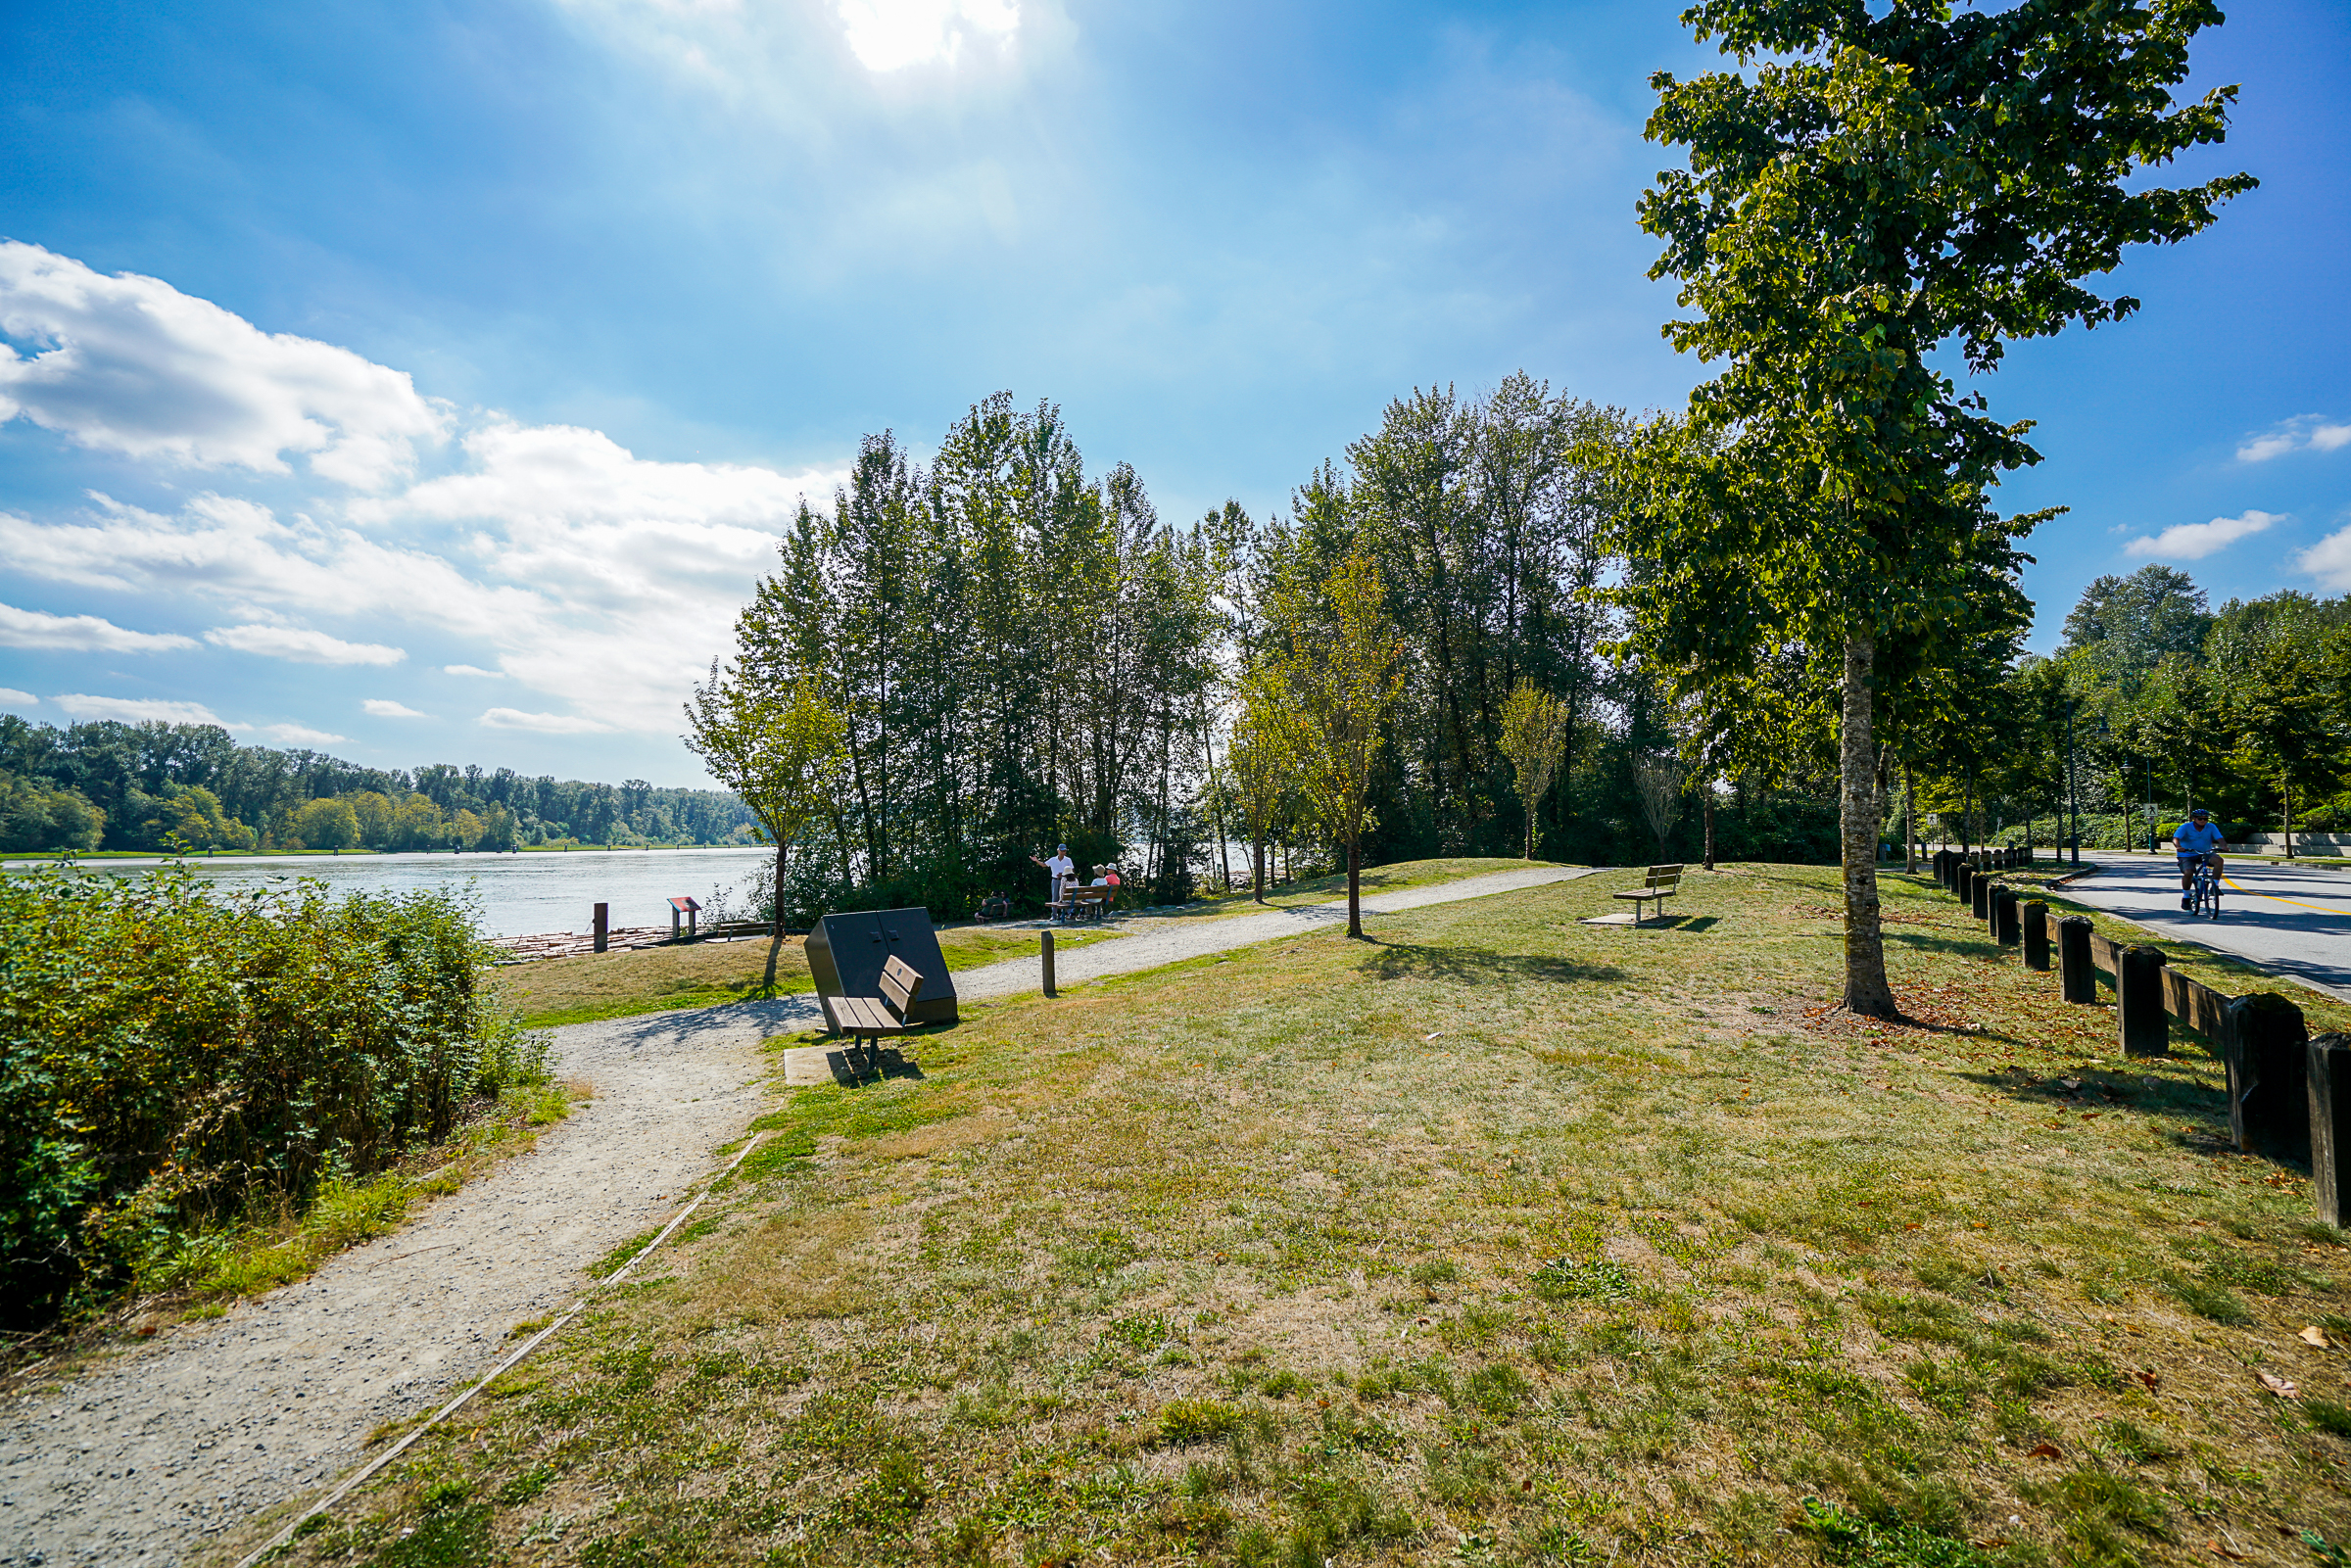 Port Coquitlam Argue Street view sold by Krista Lapp